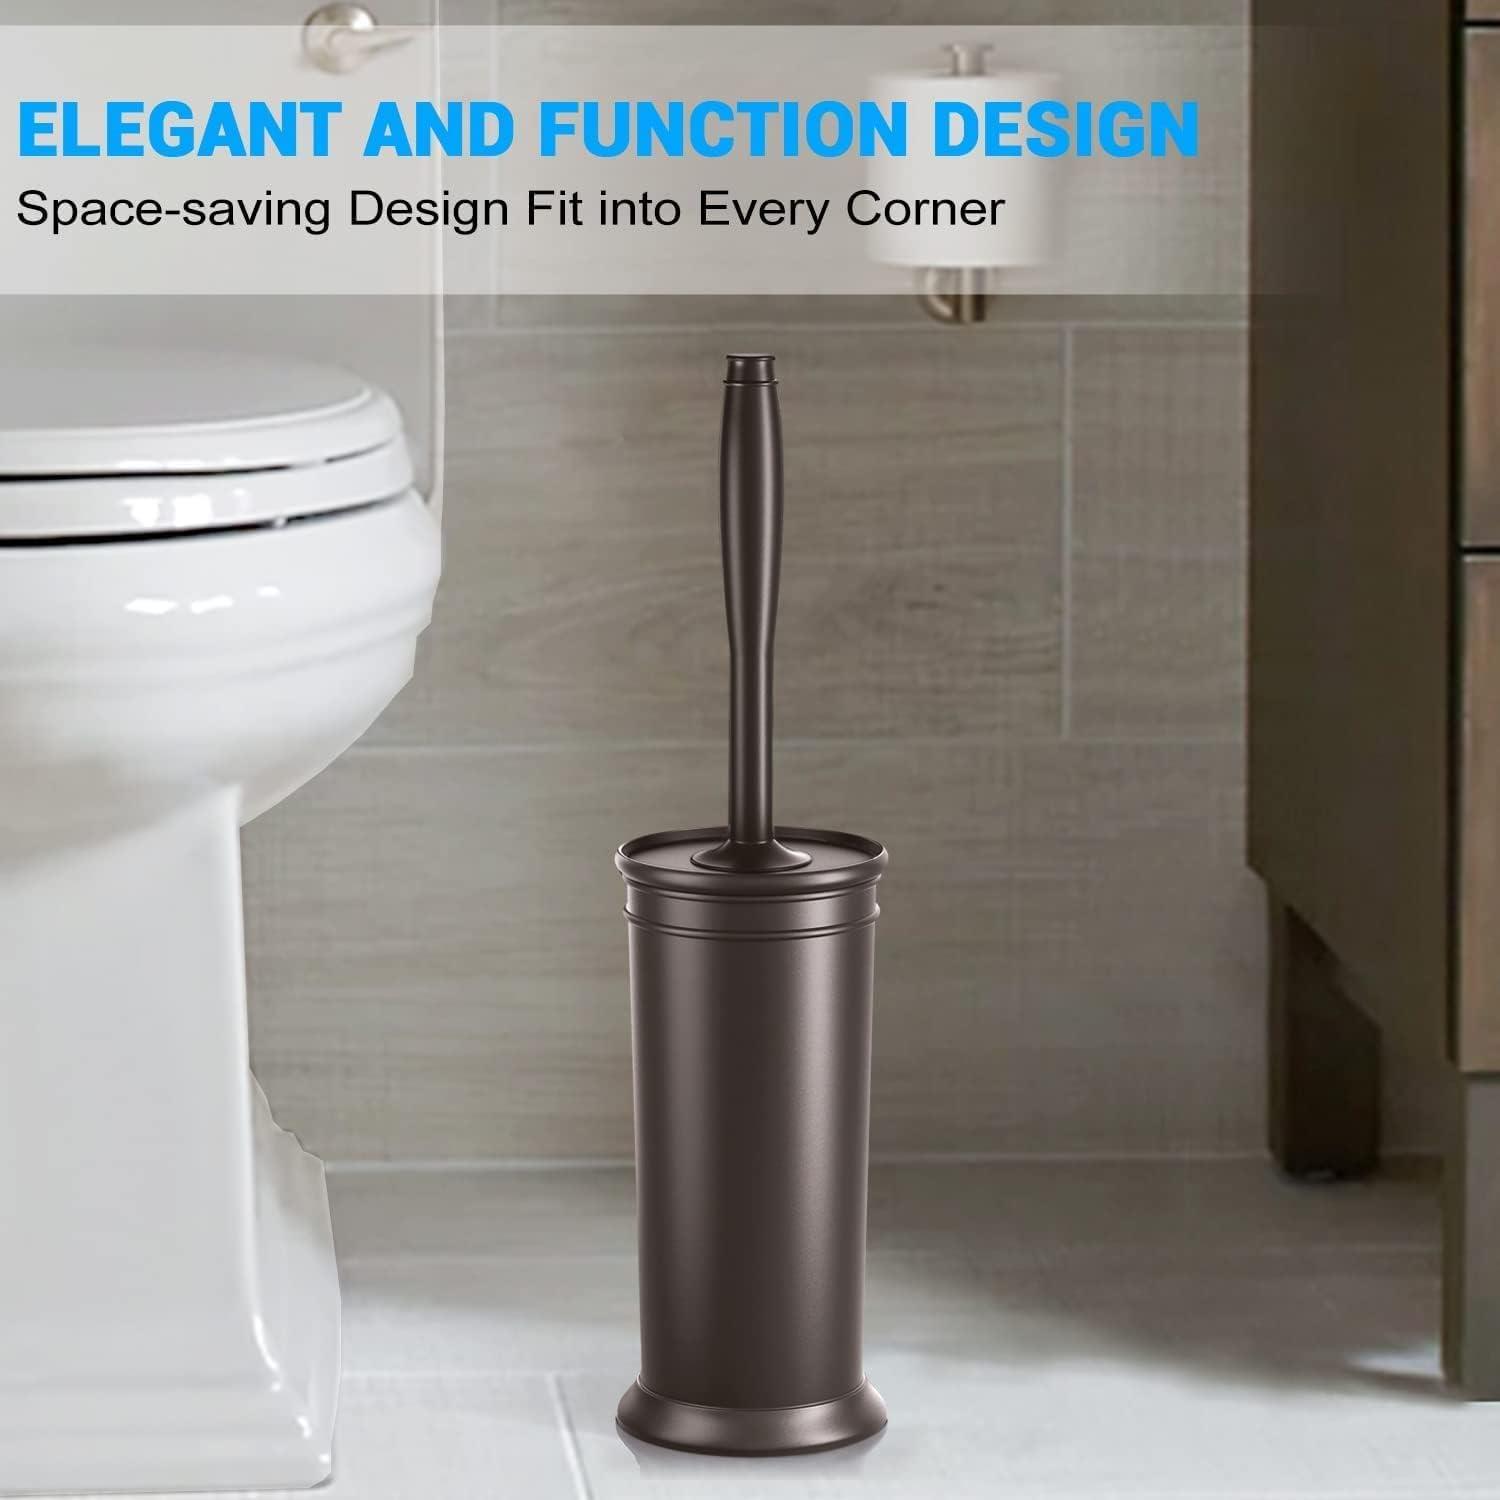 uptronic Toilet Plunger and Brush, Bowl Brush and Heavy Duty